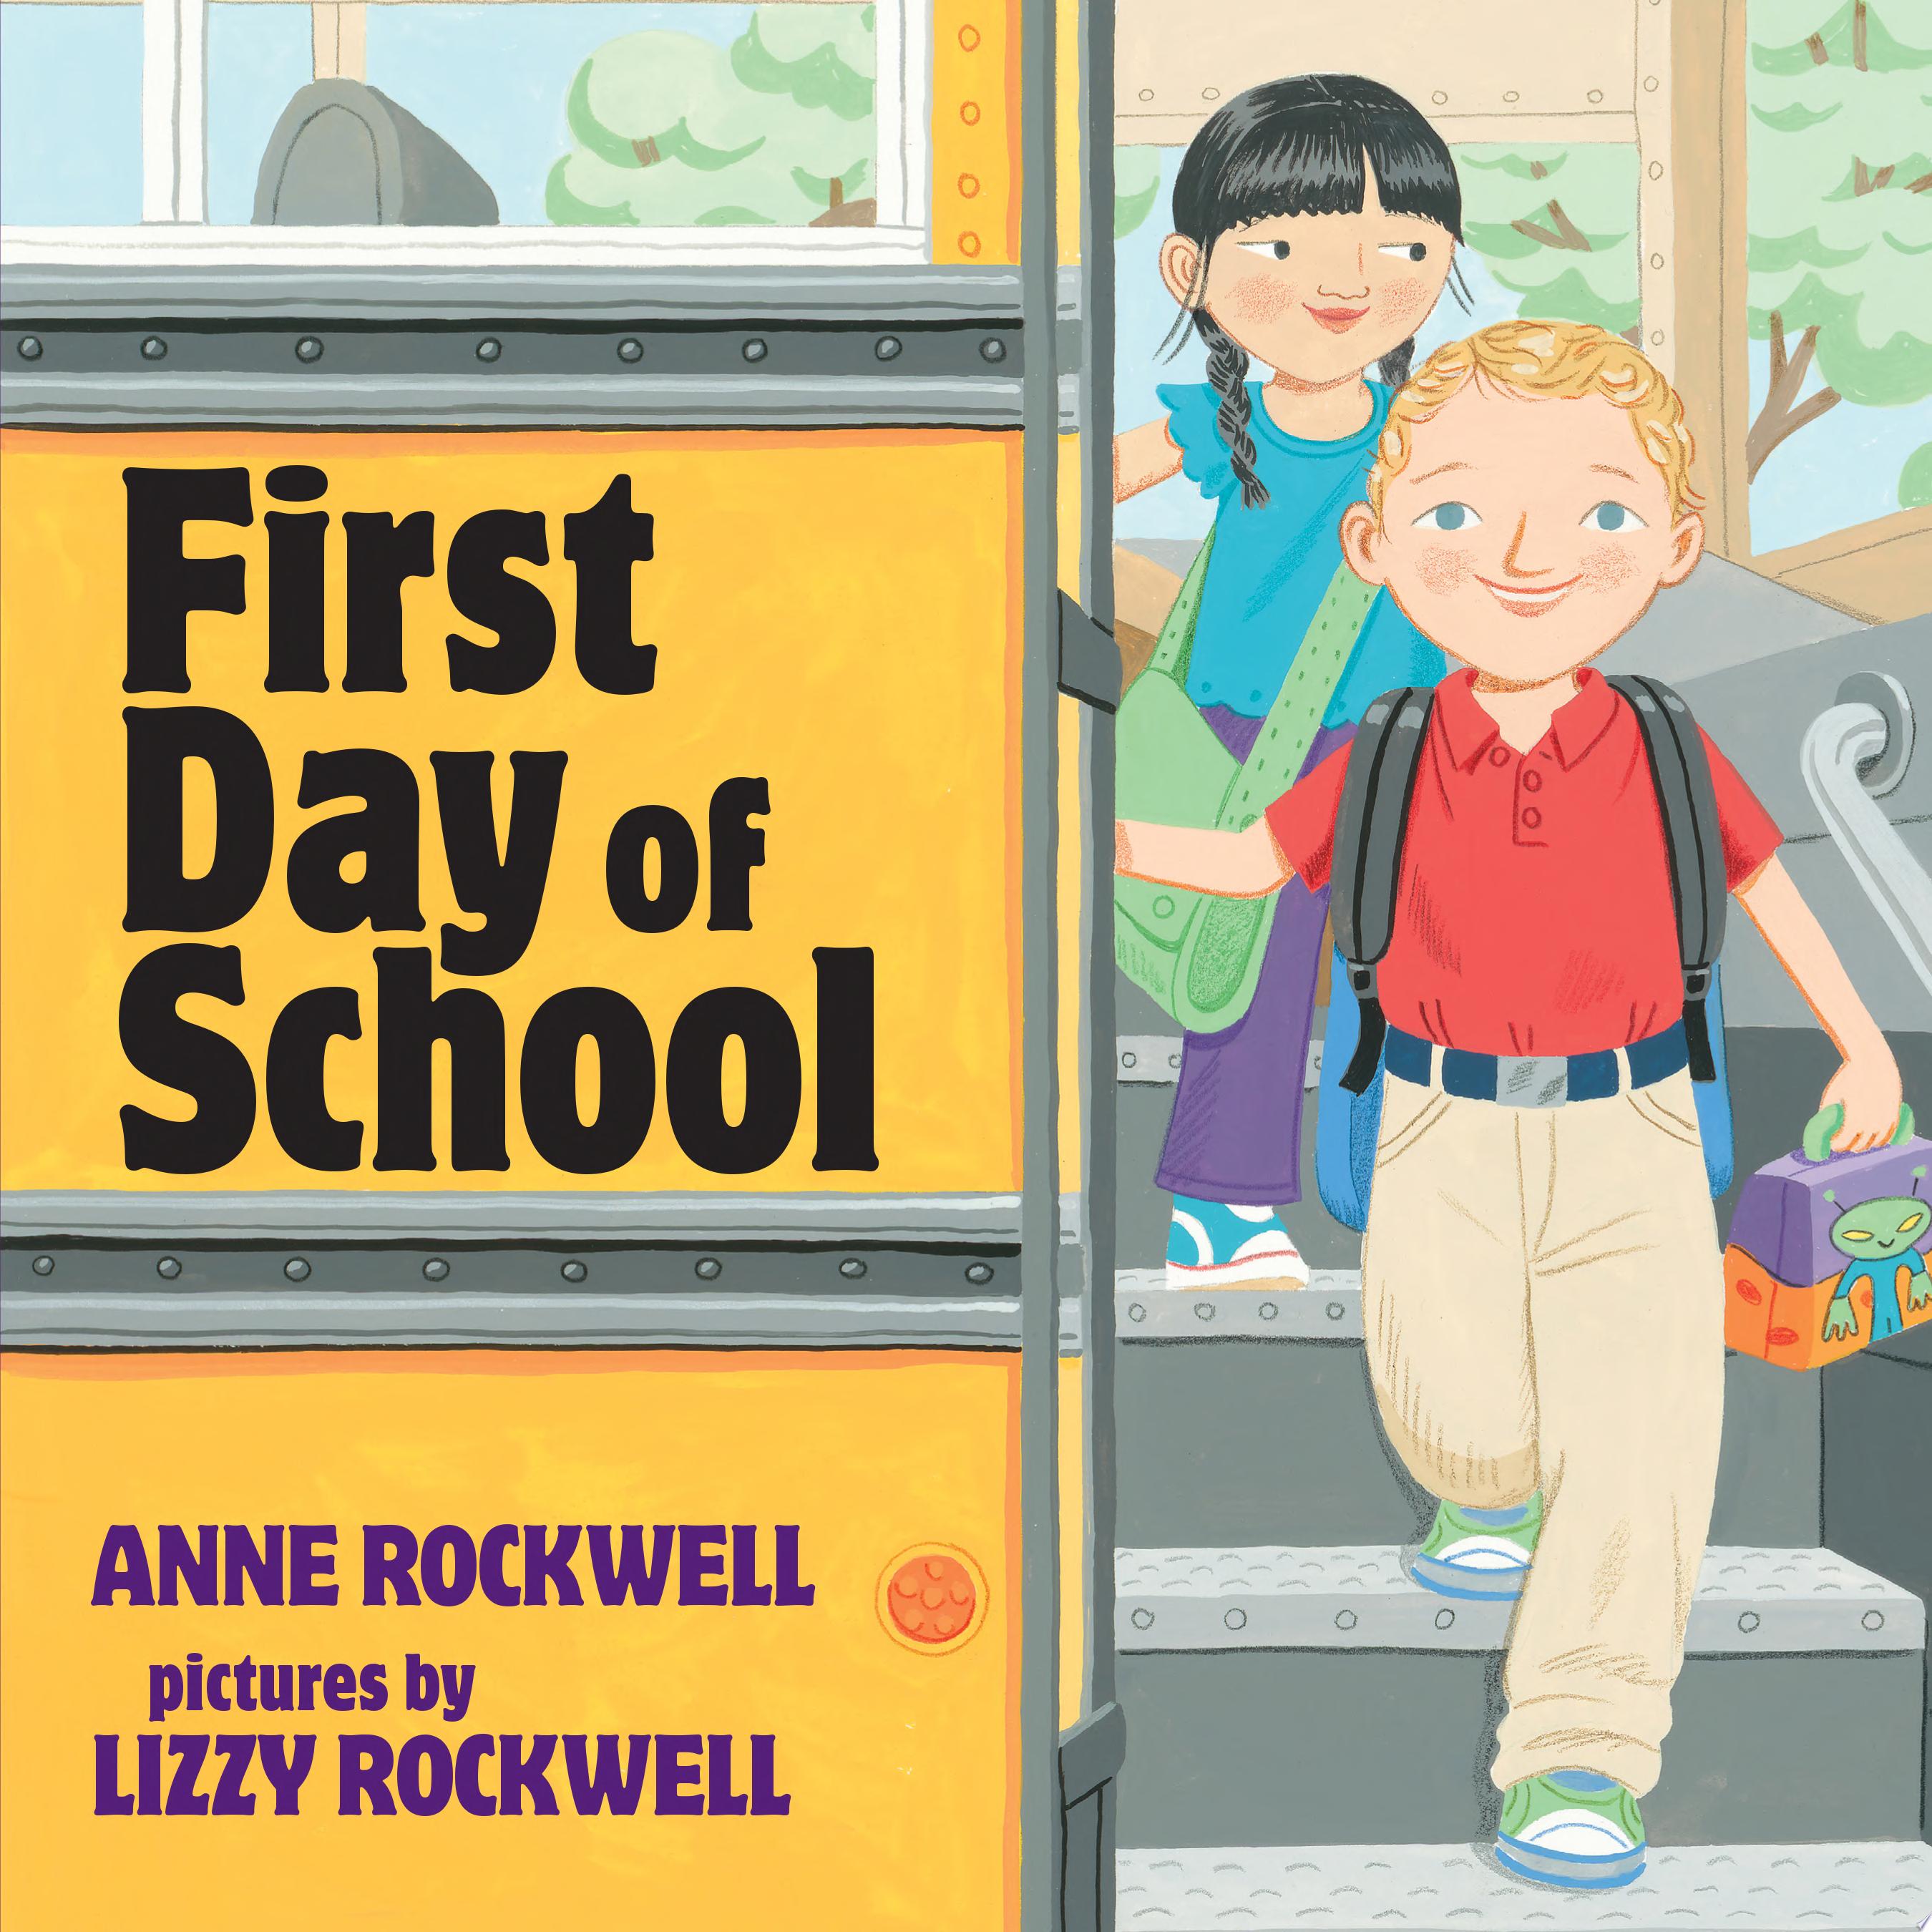 Image for "First Day of School"